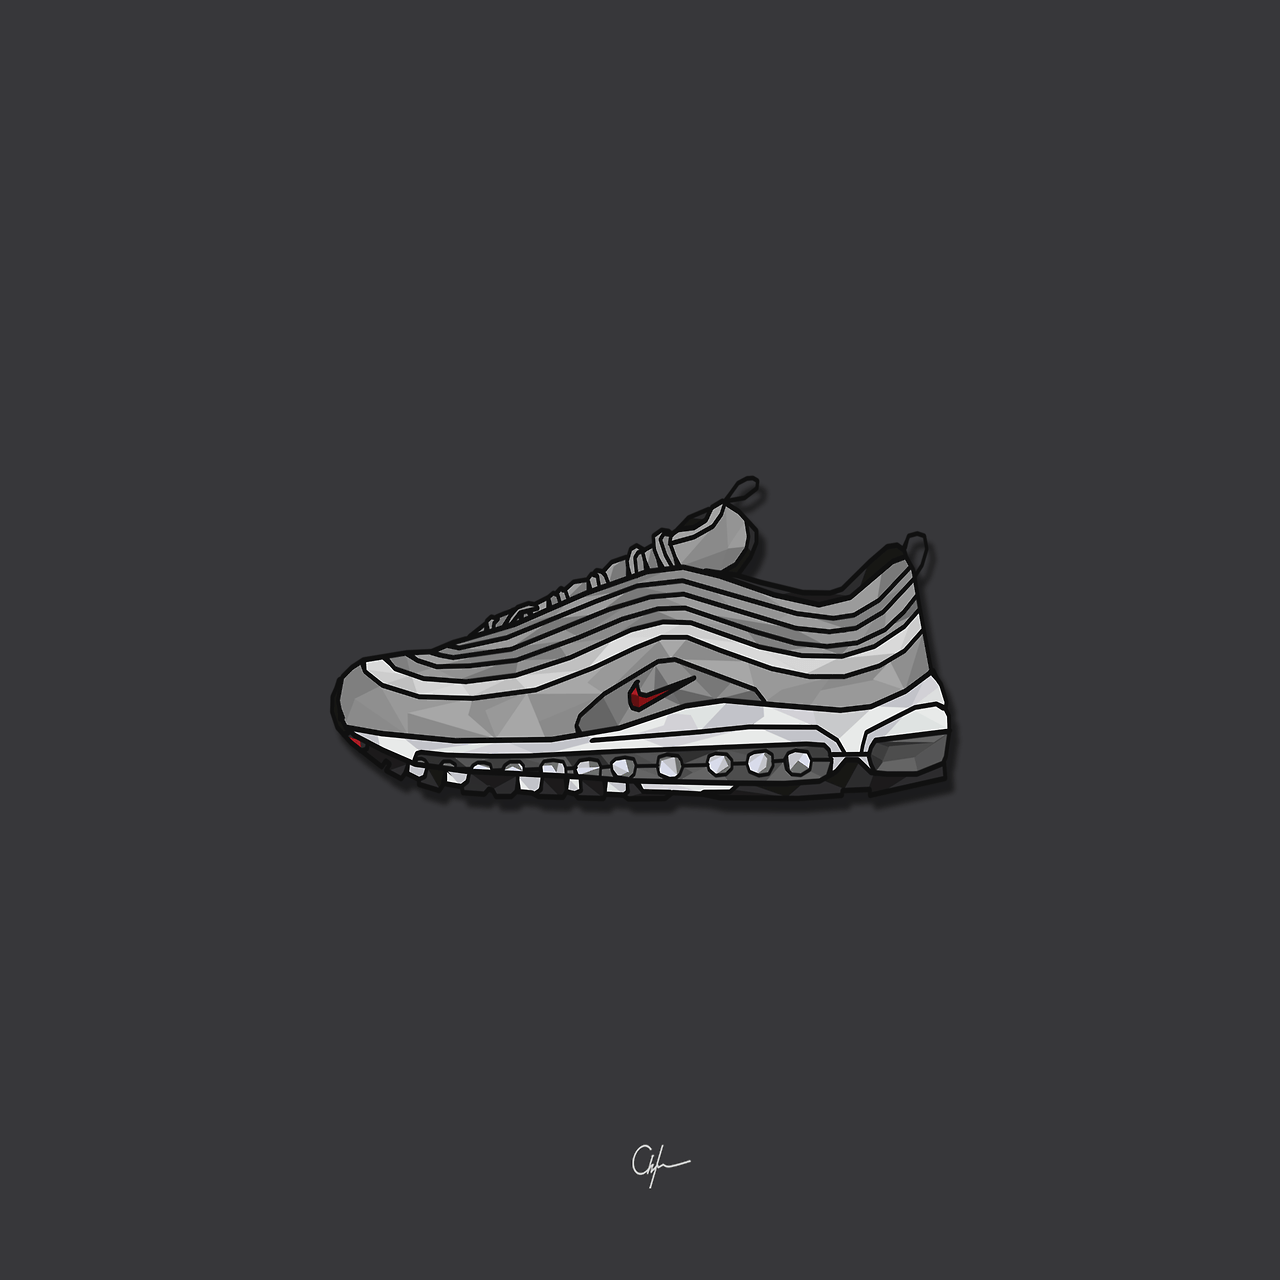 Nike Air Max 97 Wallpapers - Top Free Air Max 97 Backgrounds